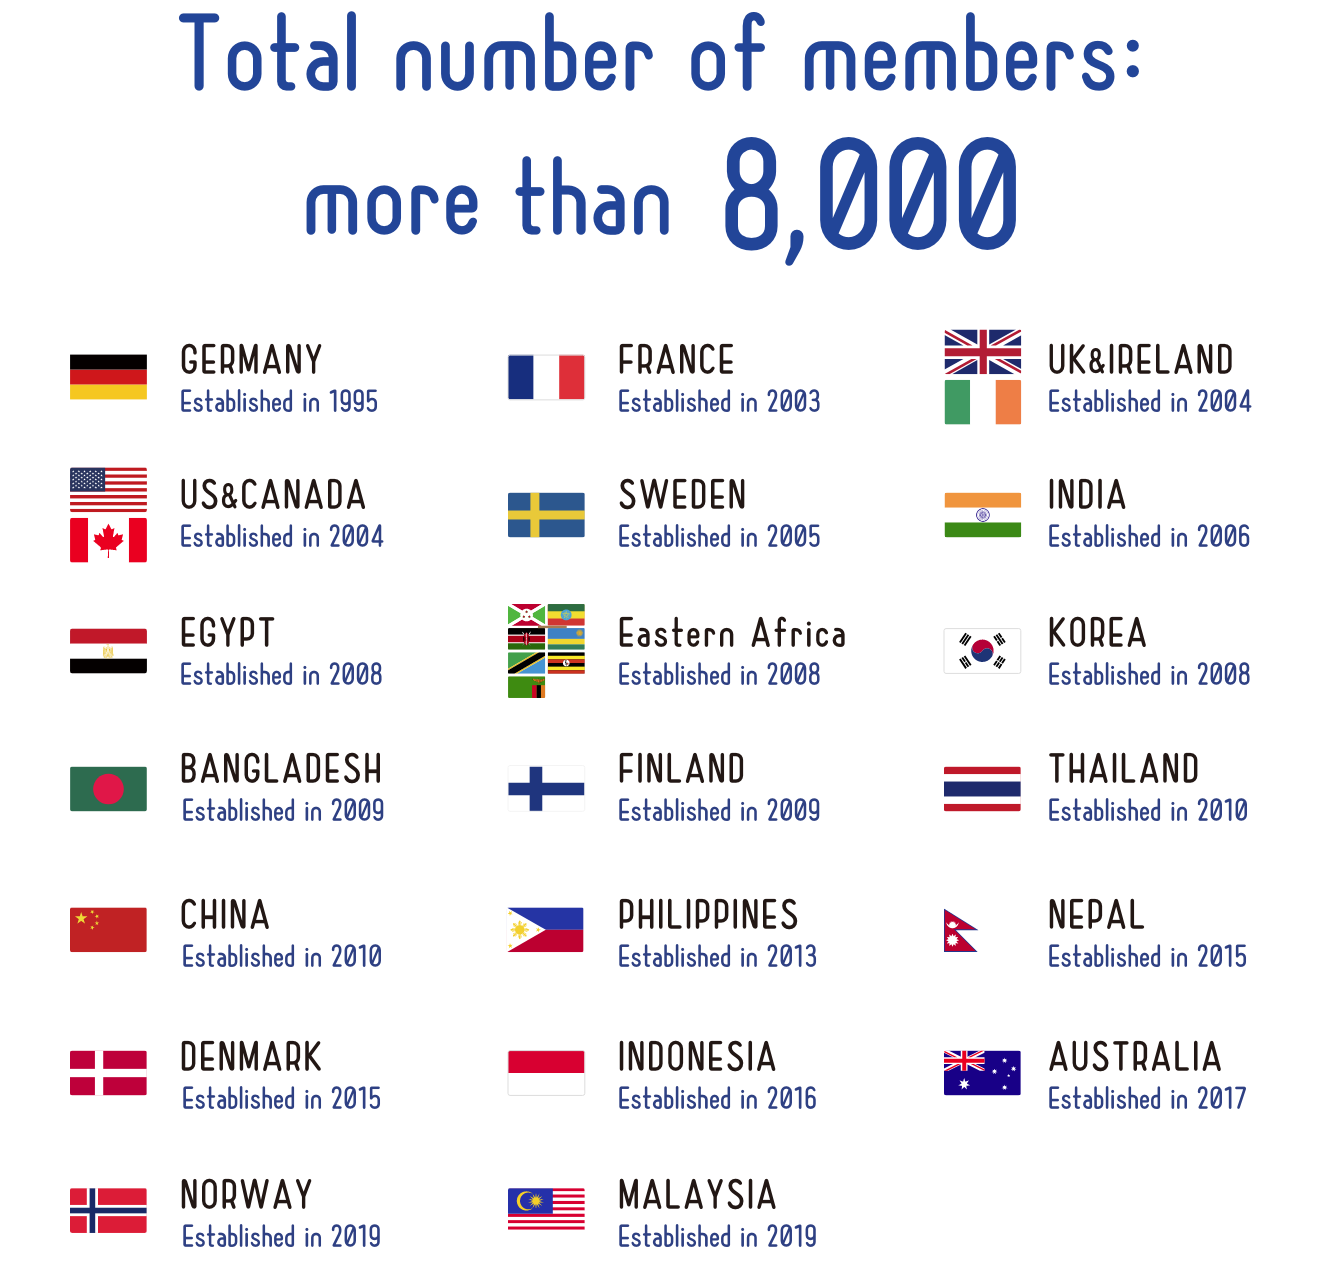 The total number of members is more than 8,000.The JSPS Alumni associations are located in Germany (established in 1995), France (established in 2003), the United Kingdom and Ireland (established in 2004), the United States and Canada (established in 2004), Sweden (established in 2005), India (established in 2006), Egypt (established in 2008), Eastern Africa (established in 2009), Korea (established in 2008), Bangladesh (established in 2009), Finland (established in 2009), Thailand (established in 2010), China (established in 2010), Philippines (established in 2013), Nepal (established in 2015), Denmark (established in 2015), Indonesia (established in 2016), Australia (established in 2017), Norway (established in 2019), Malaysia (established in 2019)